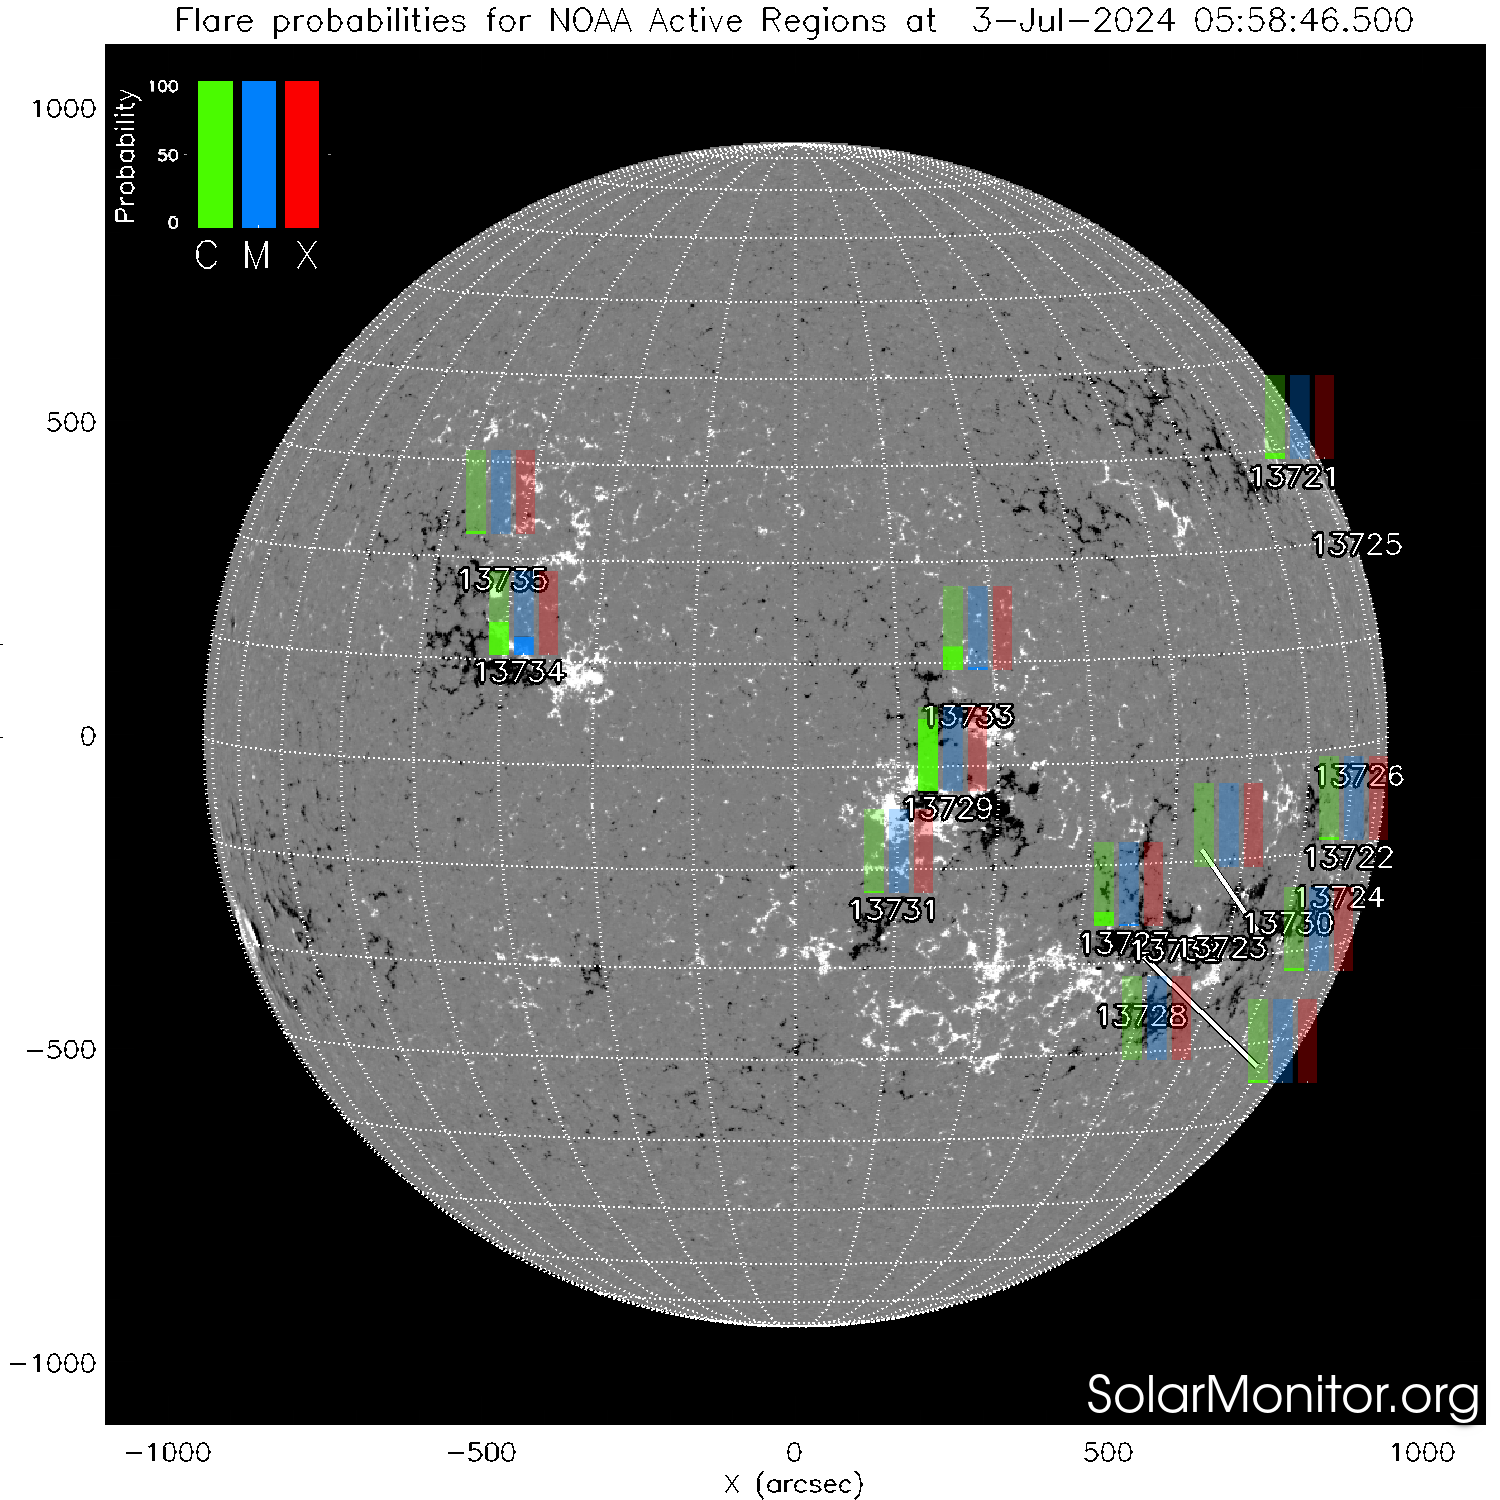 Oops! This is supposed to be a SolarMonitor Flare Forecast image